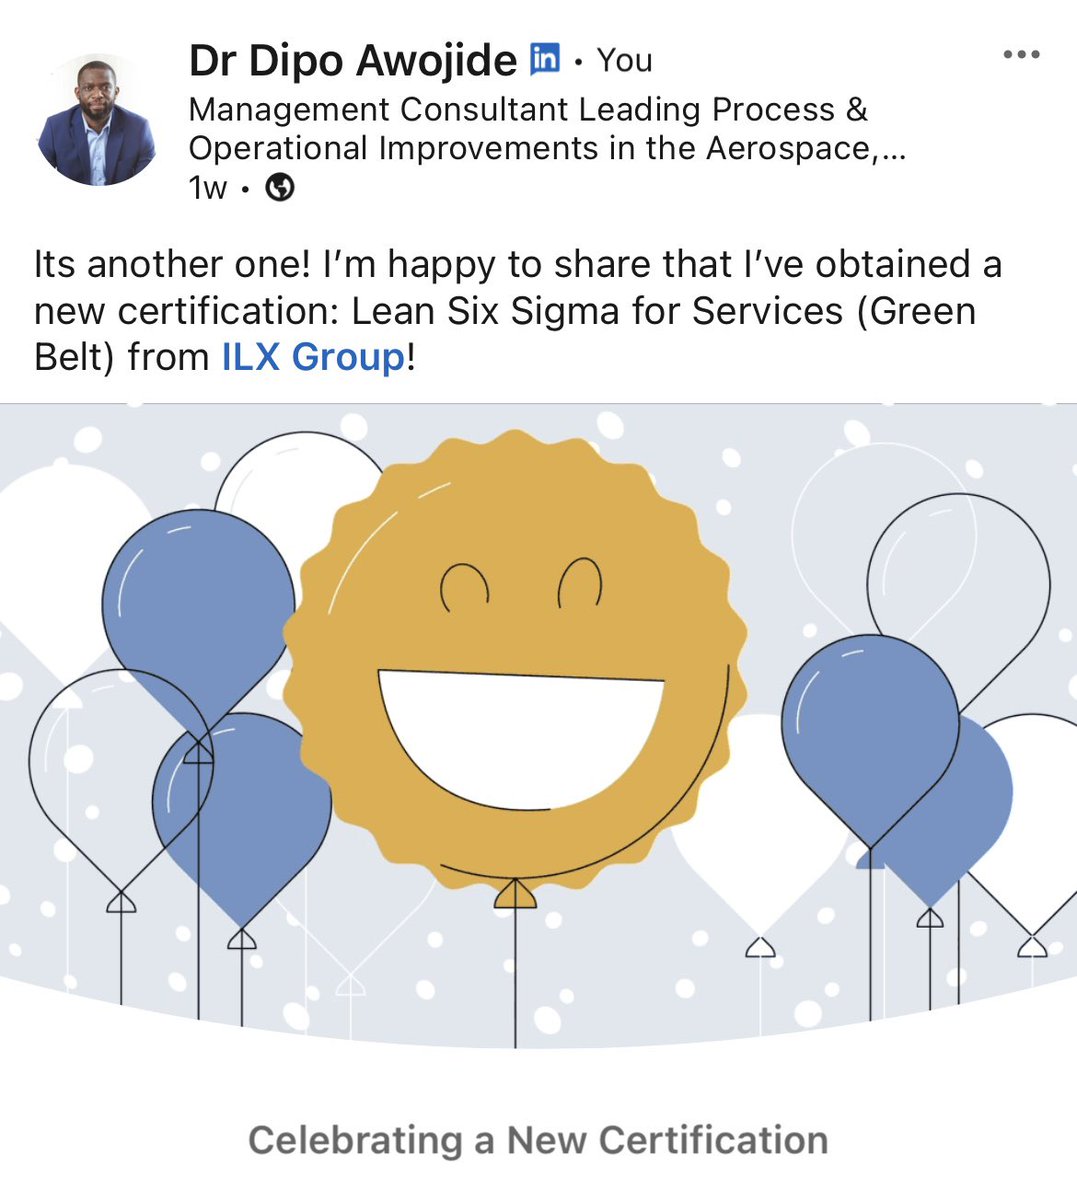 Permit me to brag for a minute 😅 This year, in my role as a Senior Consultant, Operational Improvement, I have attended trainings worth over £10,000. I recently completed the Lean Six Sigma Yellow Belt and Green Belt training. Next will be Black Belt 🥋. Invest in yourself!